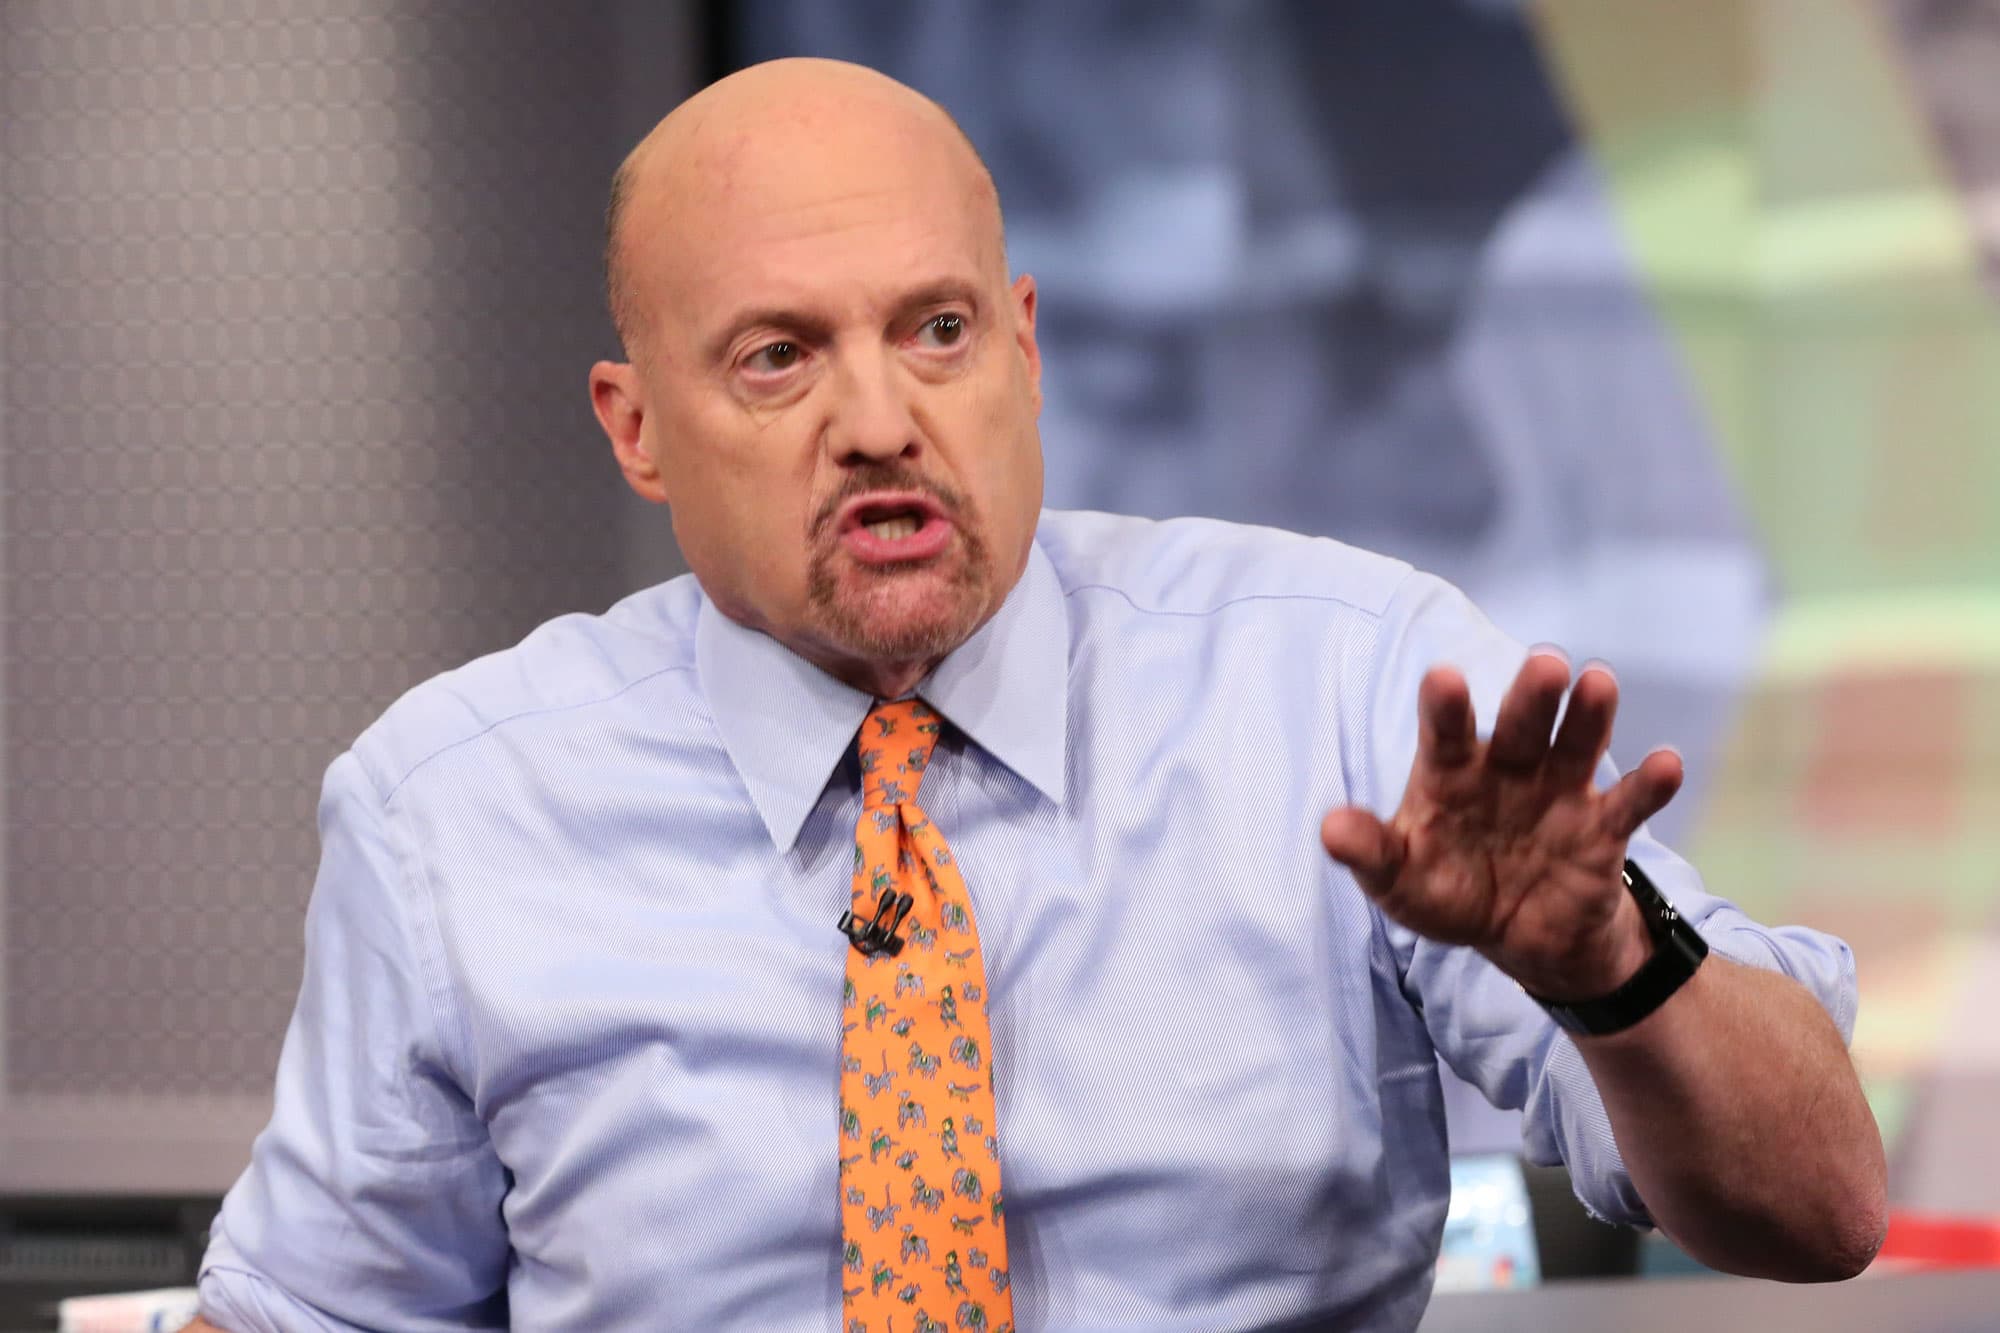 Jim Cramer says Russia’s invasion of Ukraine could put more pressure on the Fed to raise interest rates